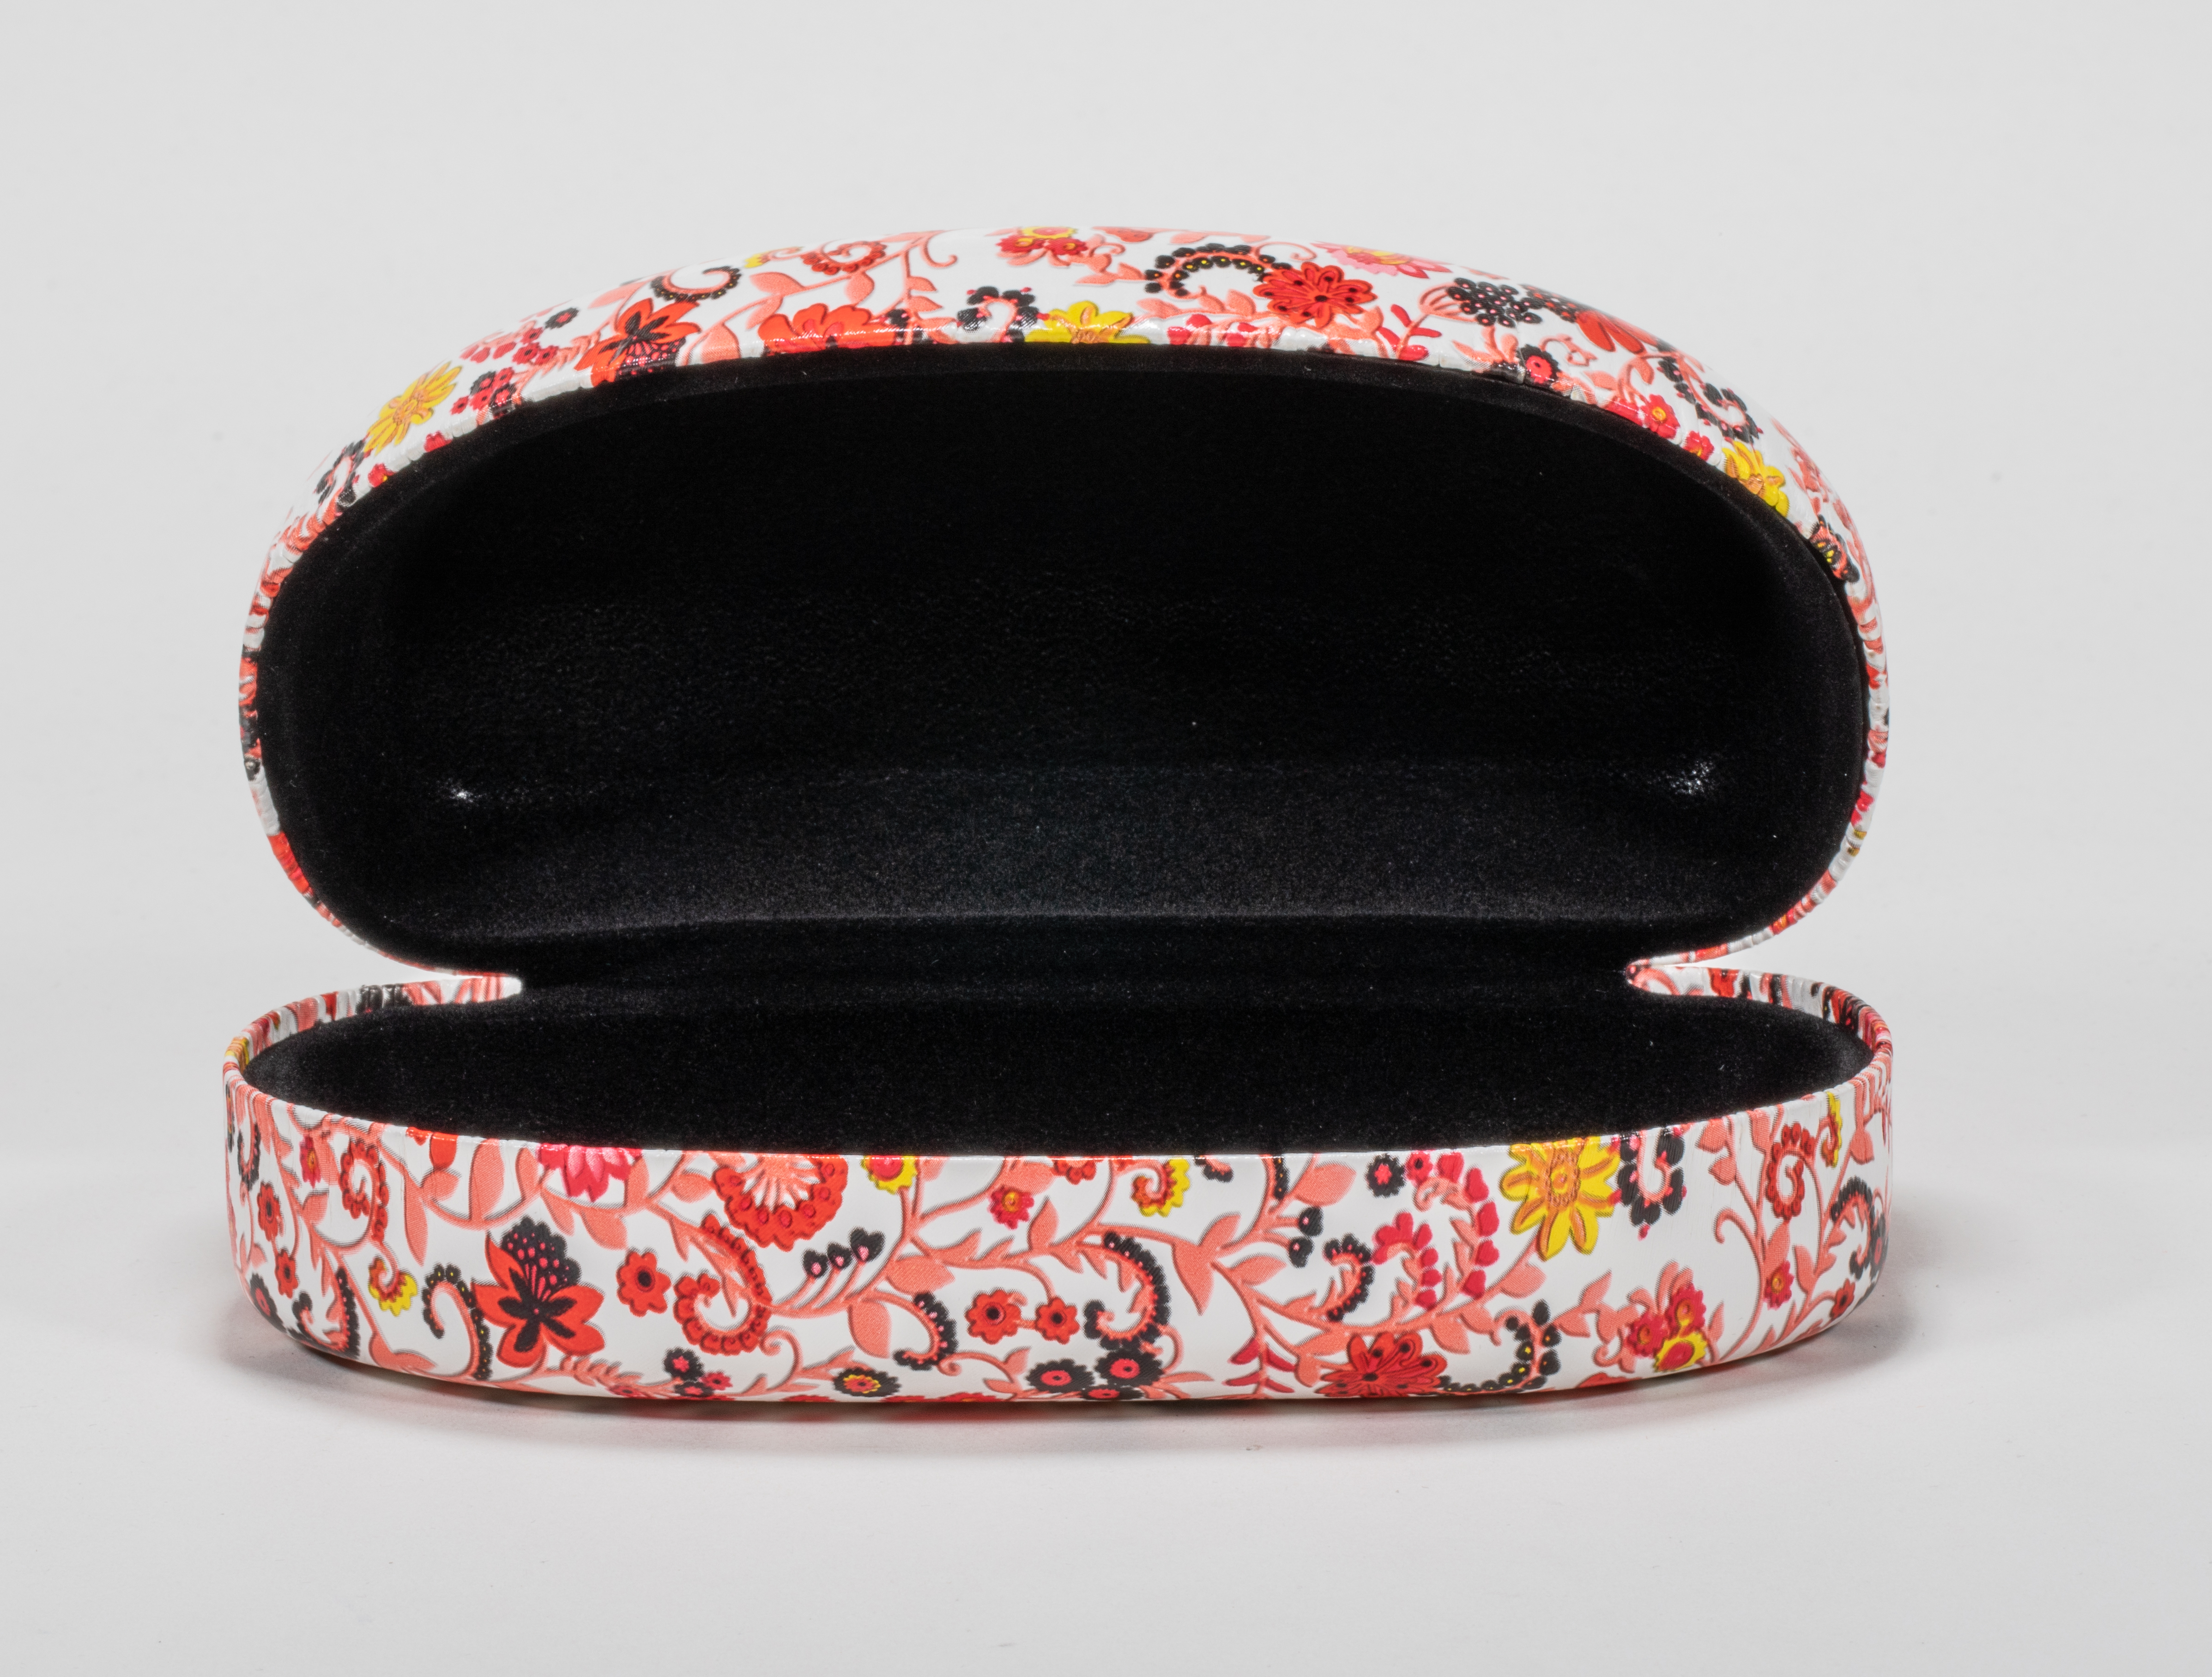 2021 Glasses Case The Sunglasses Case Printed with Flowers Is New And Fashionable,